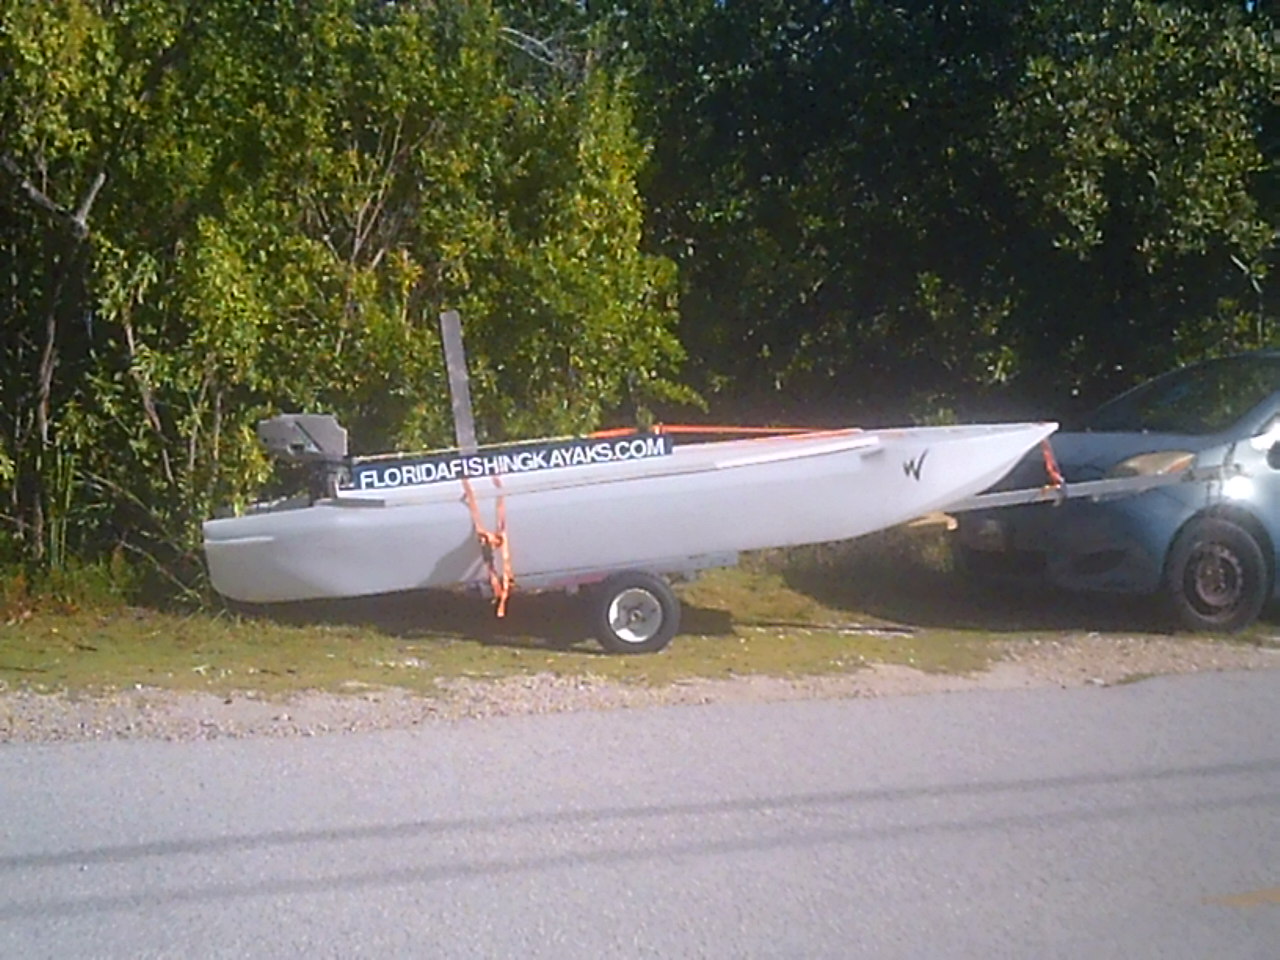 A better two-person fishing boat – STABLE KAYAKS AND MICROSKIFFS